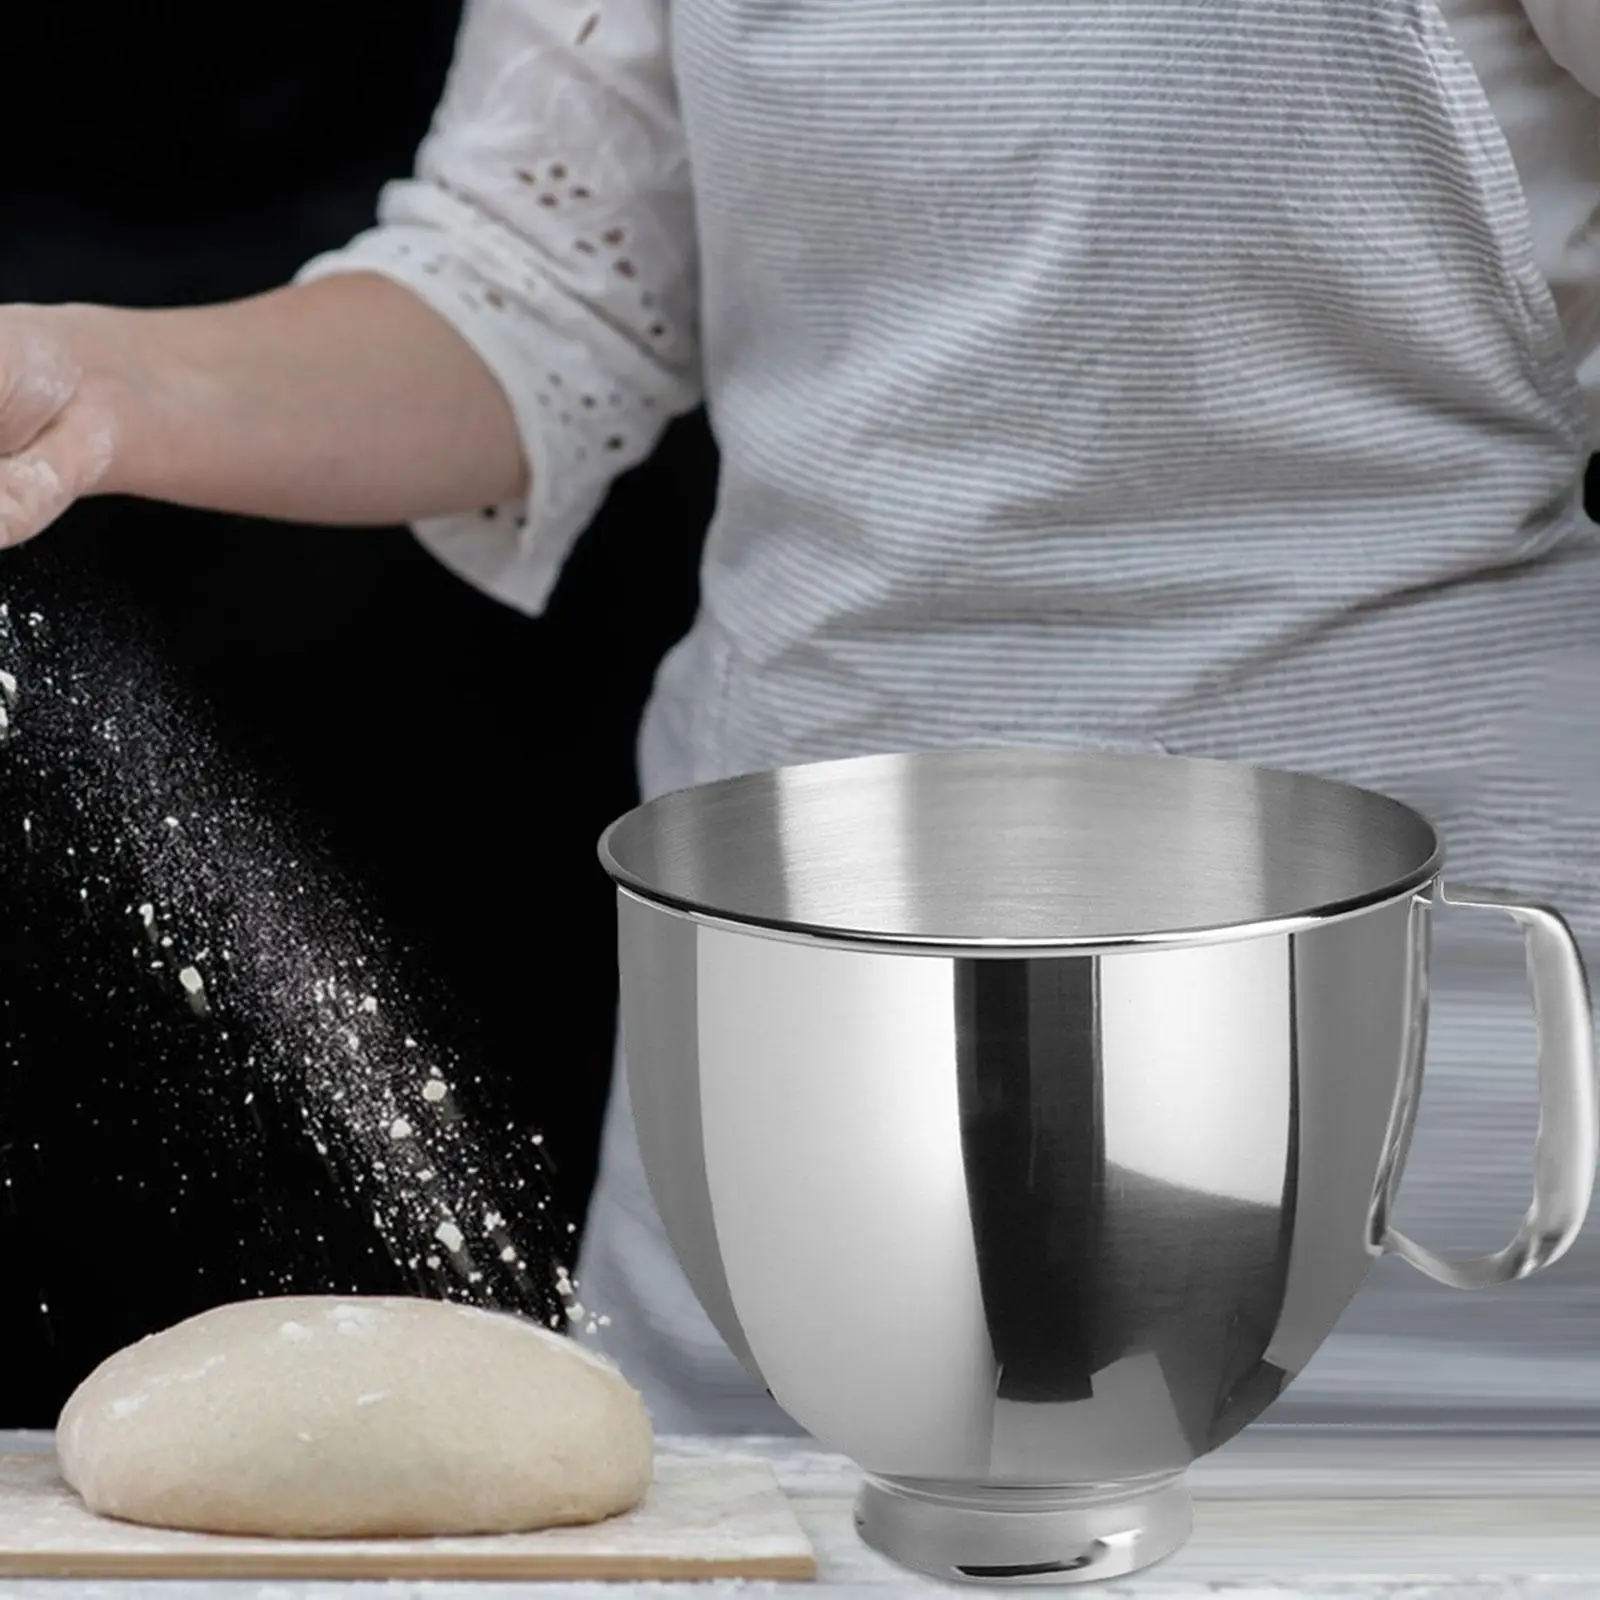 Bread Mixing Bowl for Ka 4.5/5Qt Bread Mixing Tool Electric Mixer Portable Stainless Steel Stainless Steel Bowl Mixing Pot Bowl